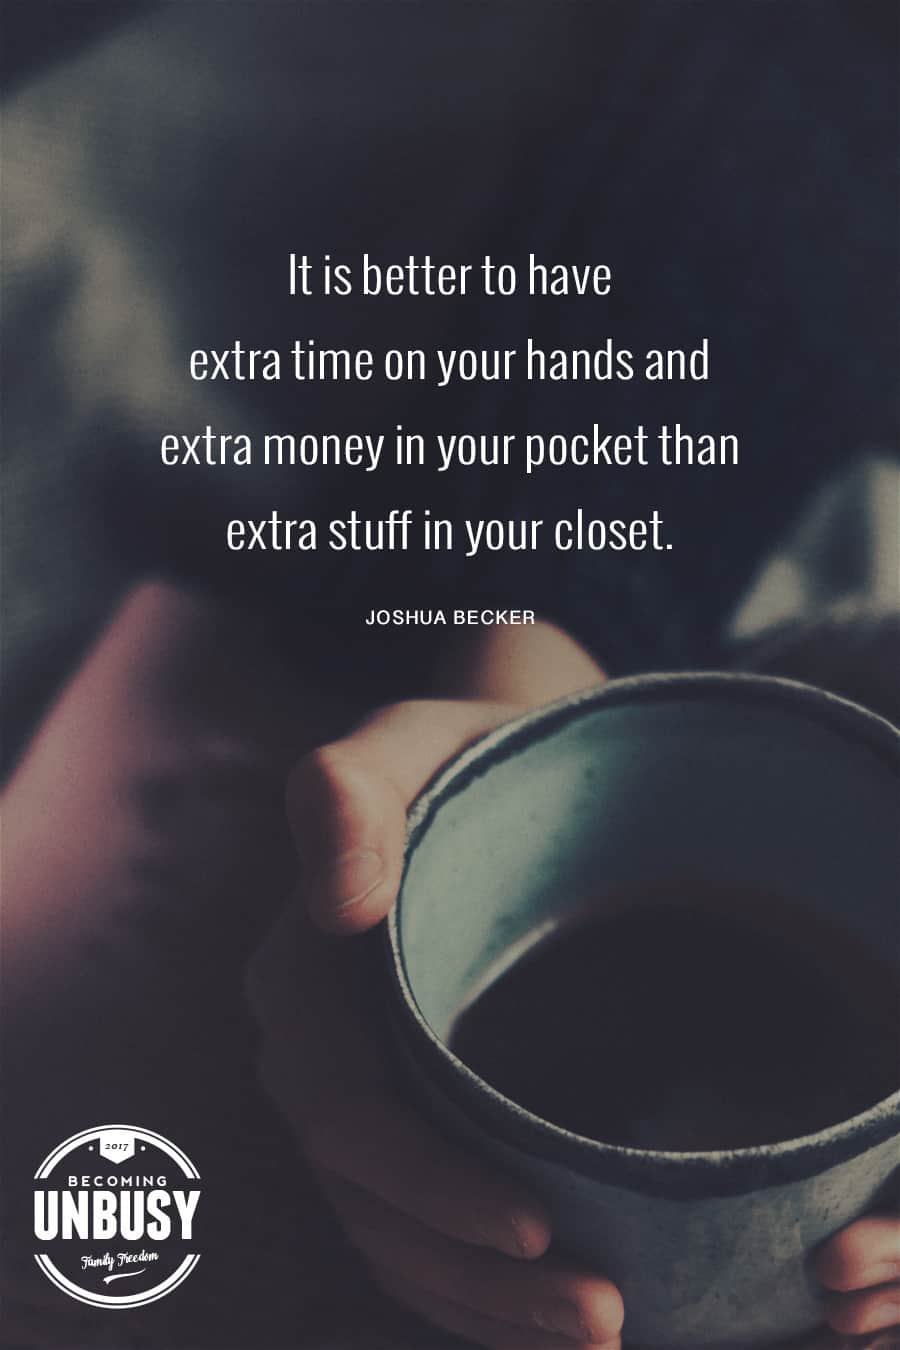 It is better to have extra time on your hands and extra money in your pocket than extra stuff in your closet. #becomingunbusy *Great post on embracing simplicity